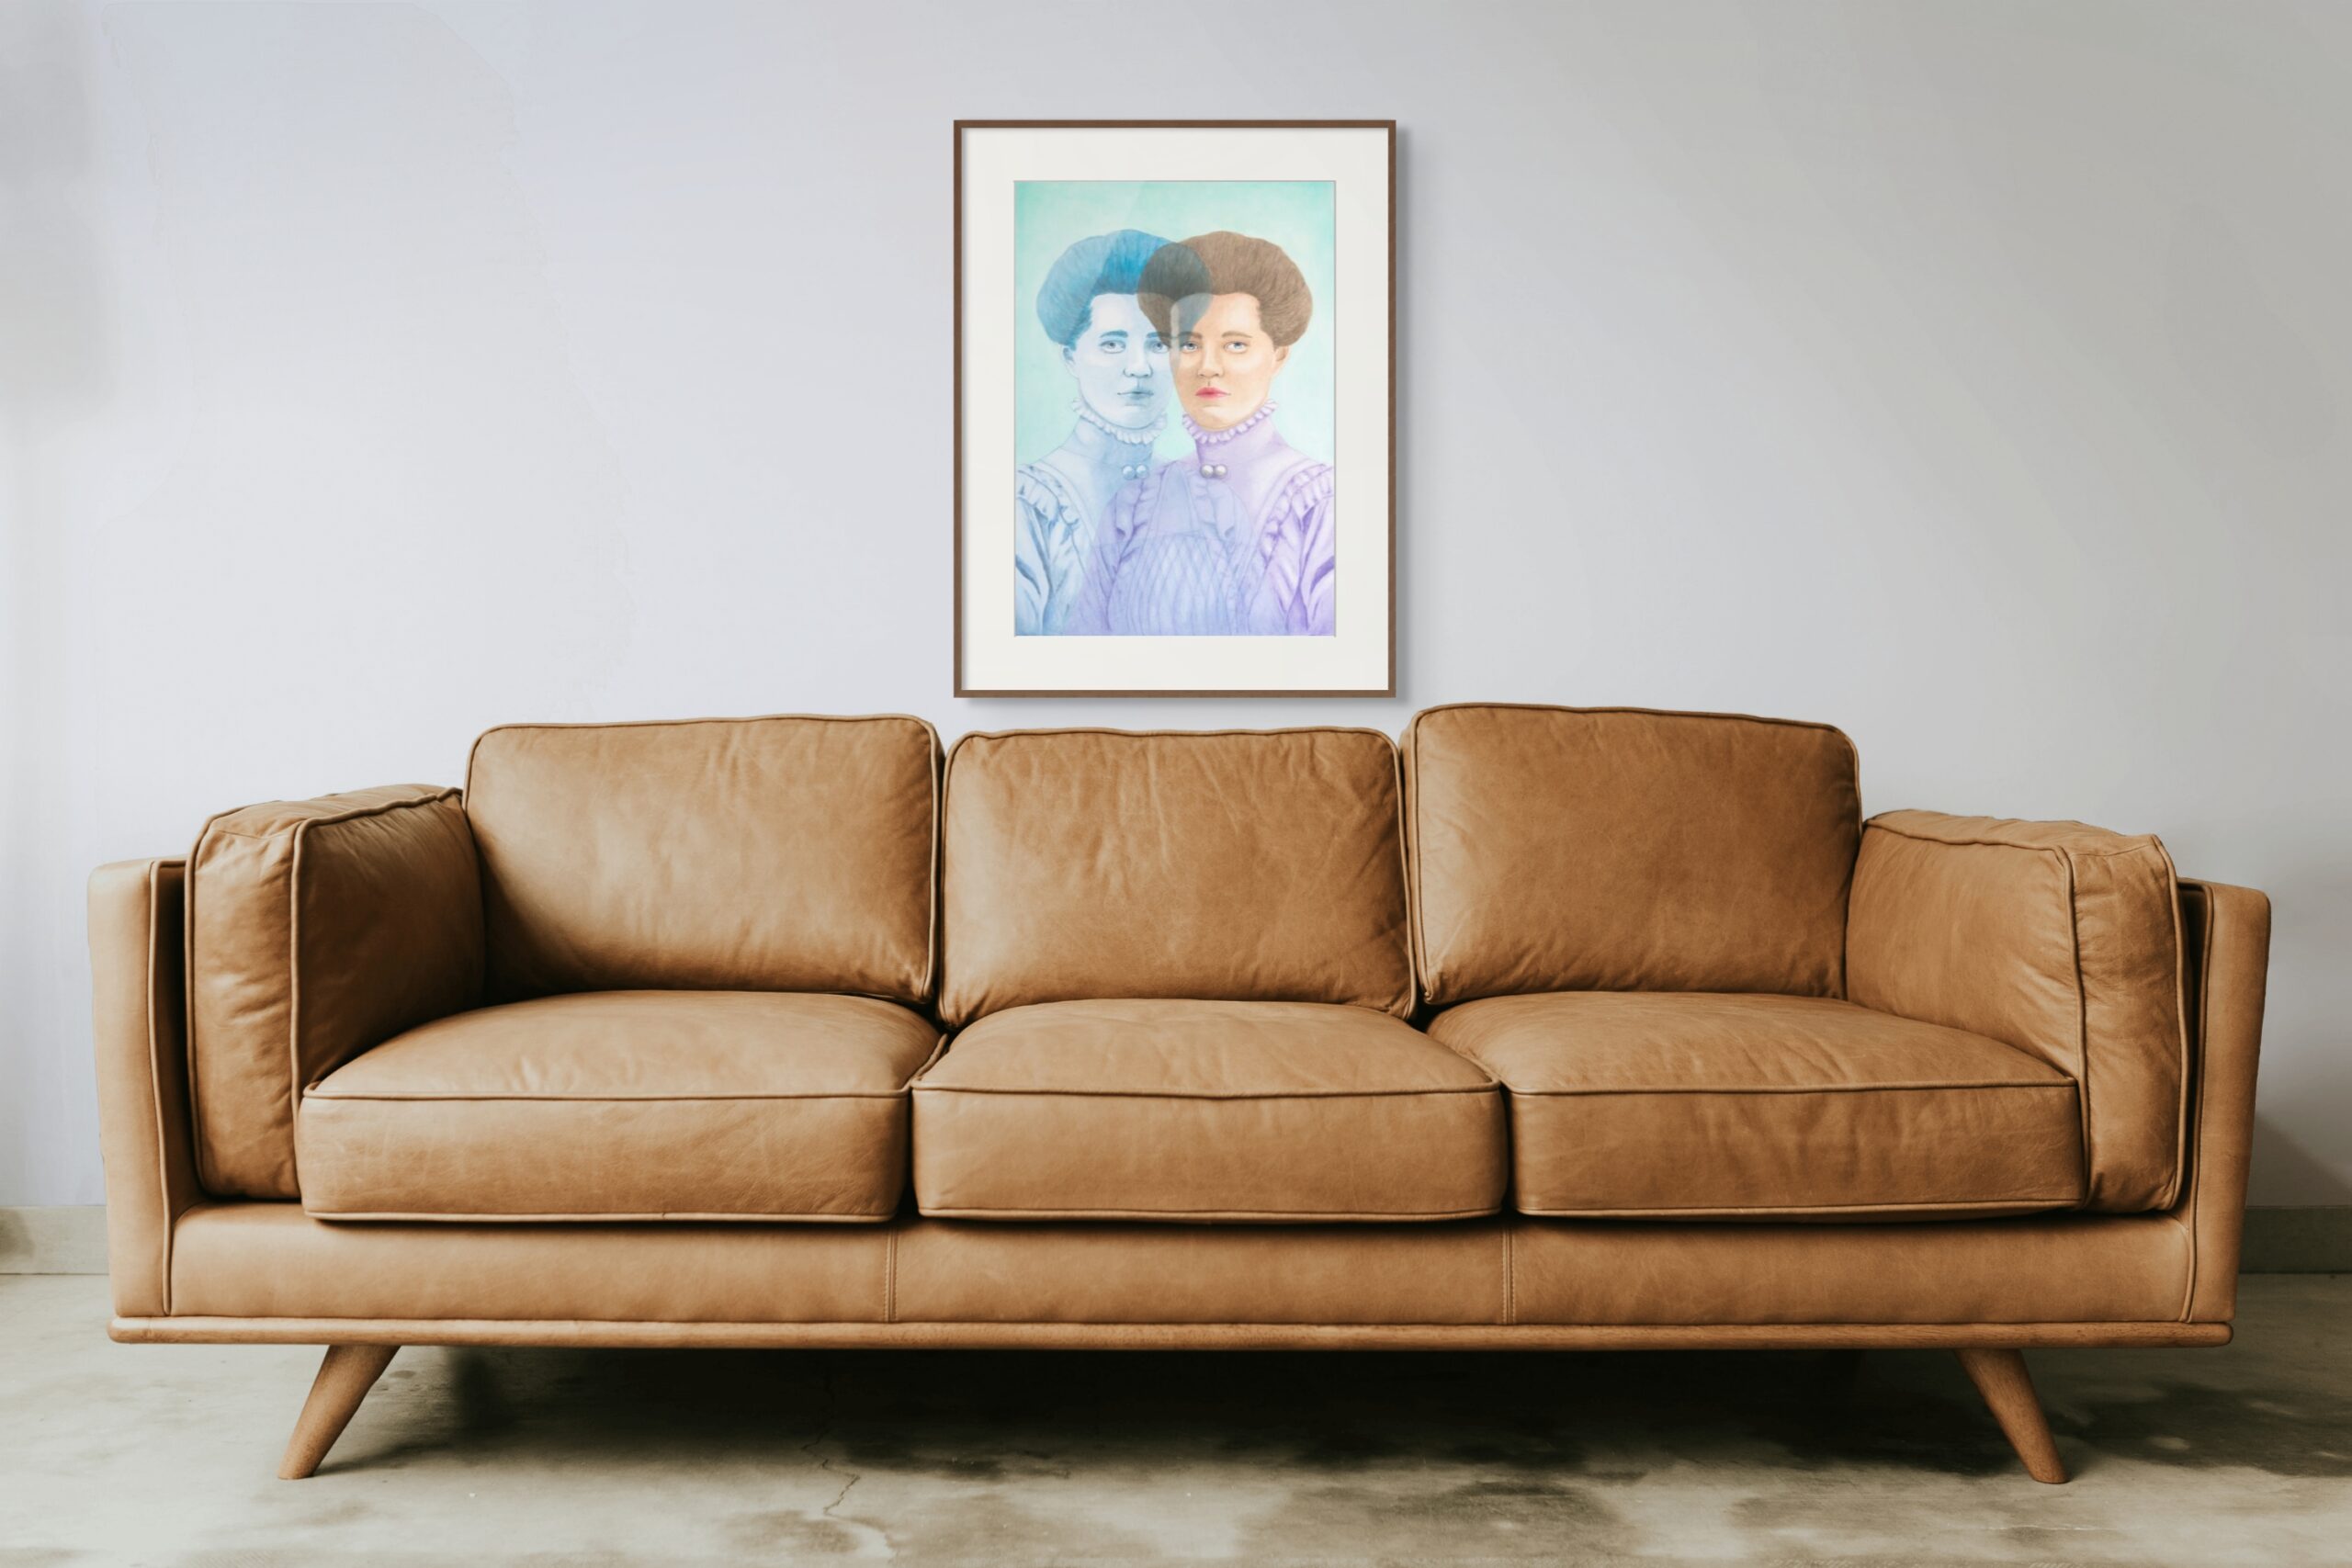 Picture of two mirrored ladies in pastel colors hanging above a brown leather sofa.